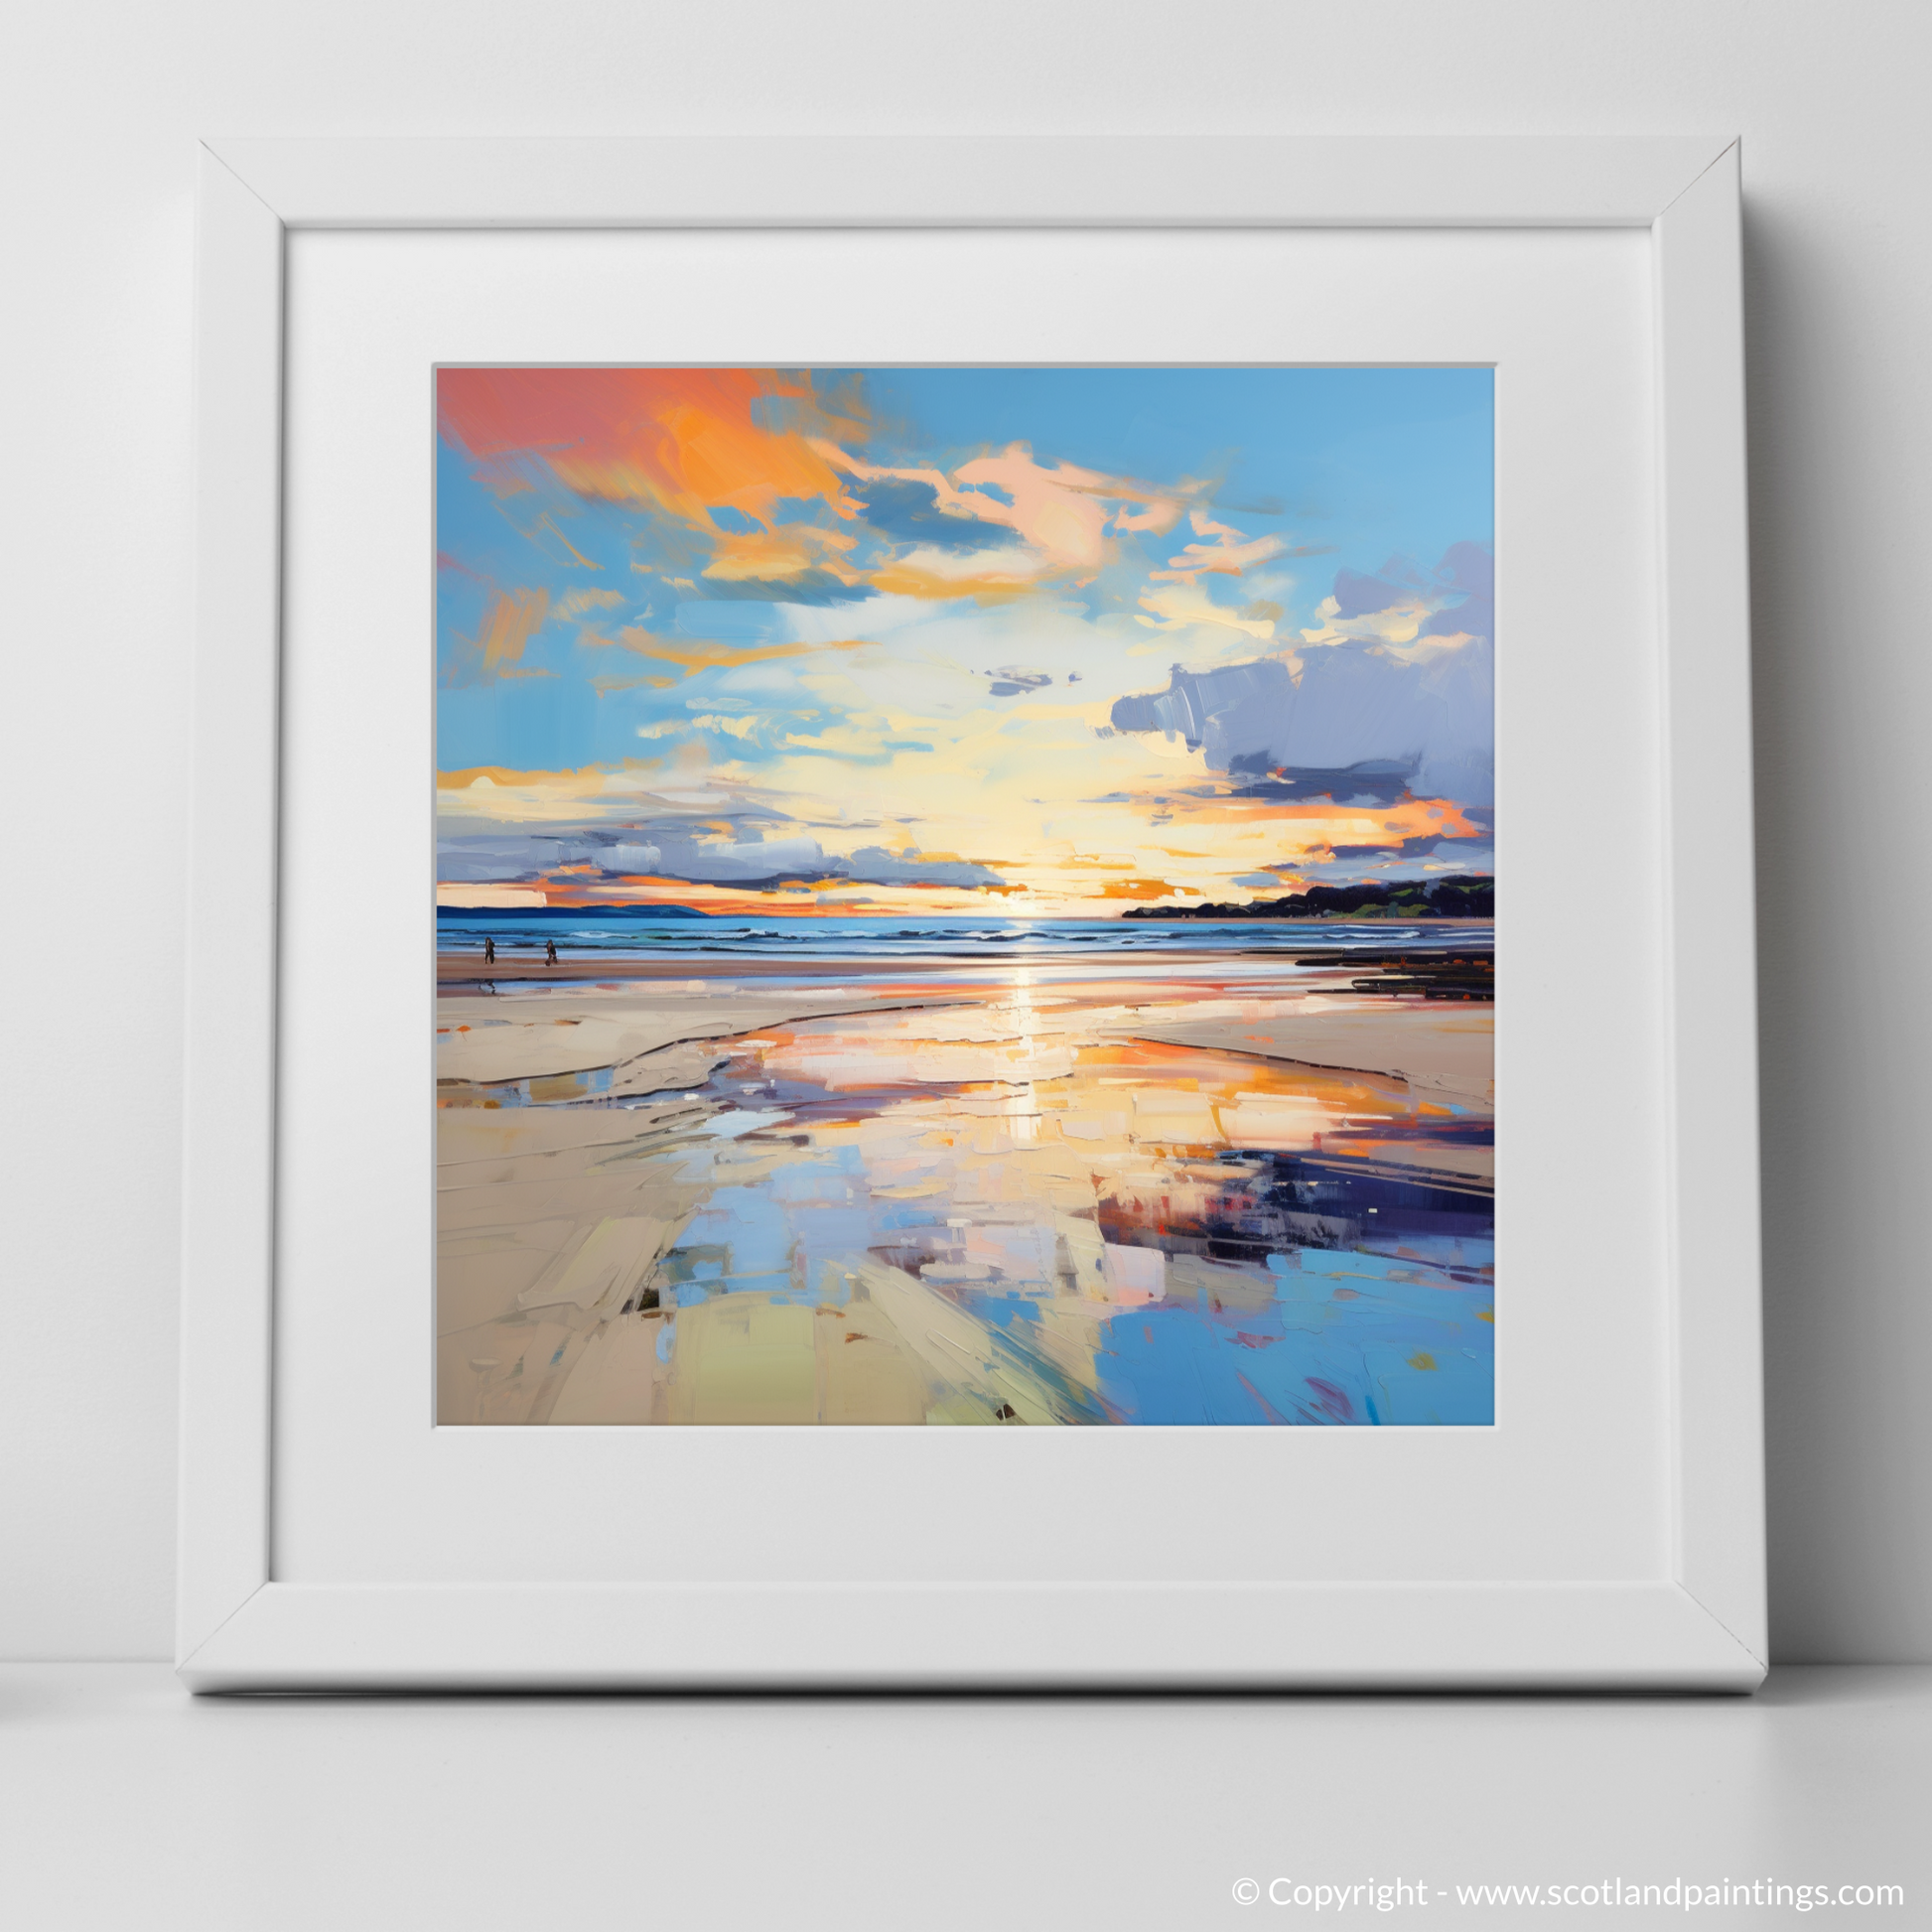 Art Print of Nairn Beach at golden hour with a white frame